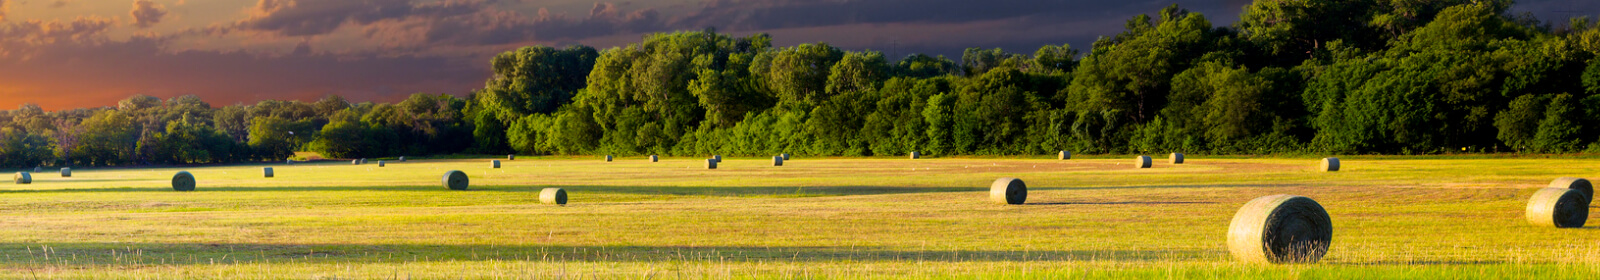 A large field with hay bales